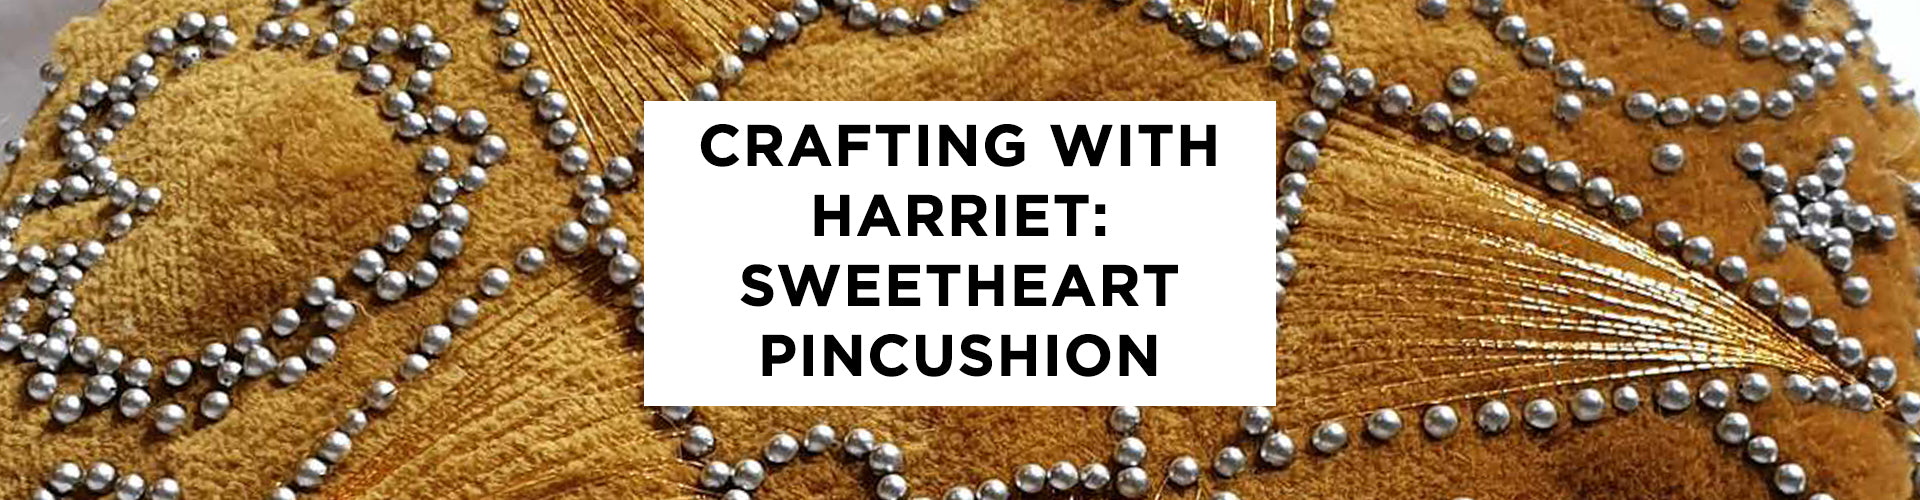 Crafting at Home with Harriet: Sweetheart Pincushion